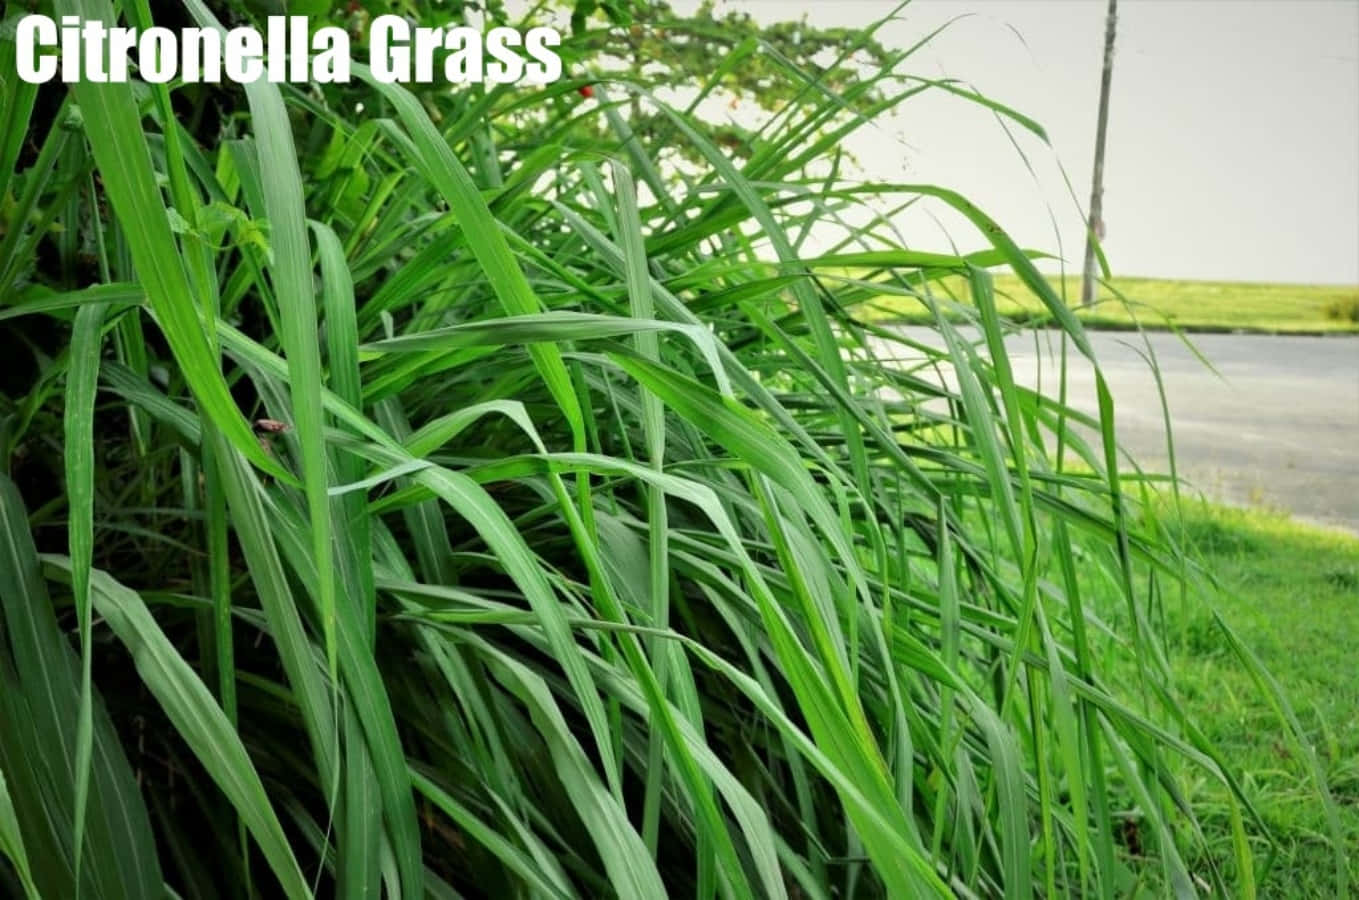 Caption: Detailed Close-Up Grass Identification Image